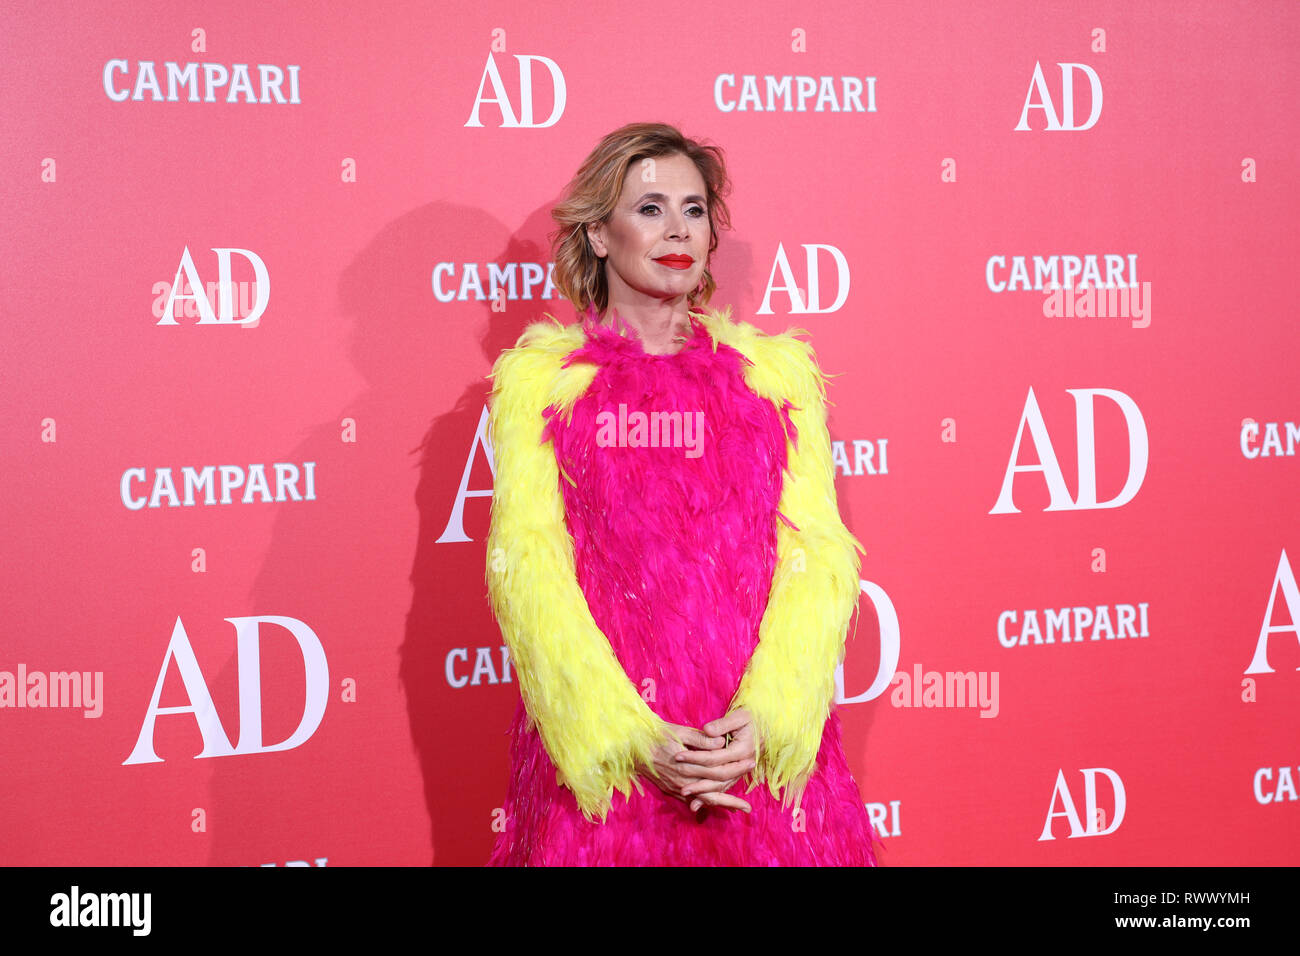 Agatha Ruiz de la Prada seen on the red carpet during the XII Edition of the Interior Design, Design and Architecture Awards organized by the AD magazine in the Teatro Real de Madrid. Stock Photo